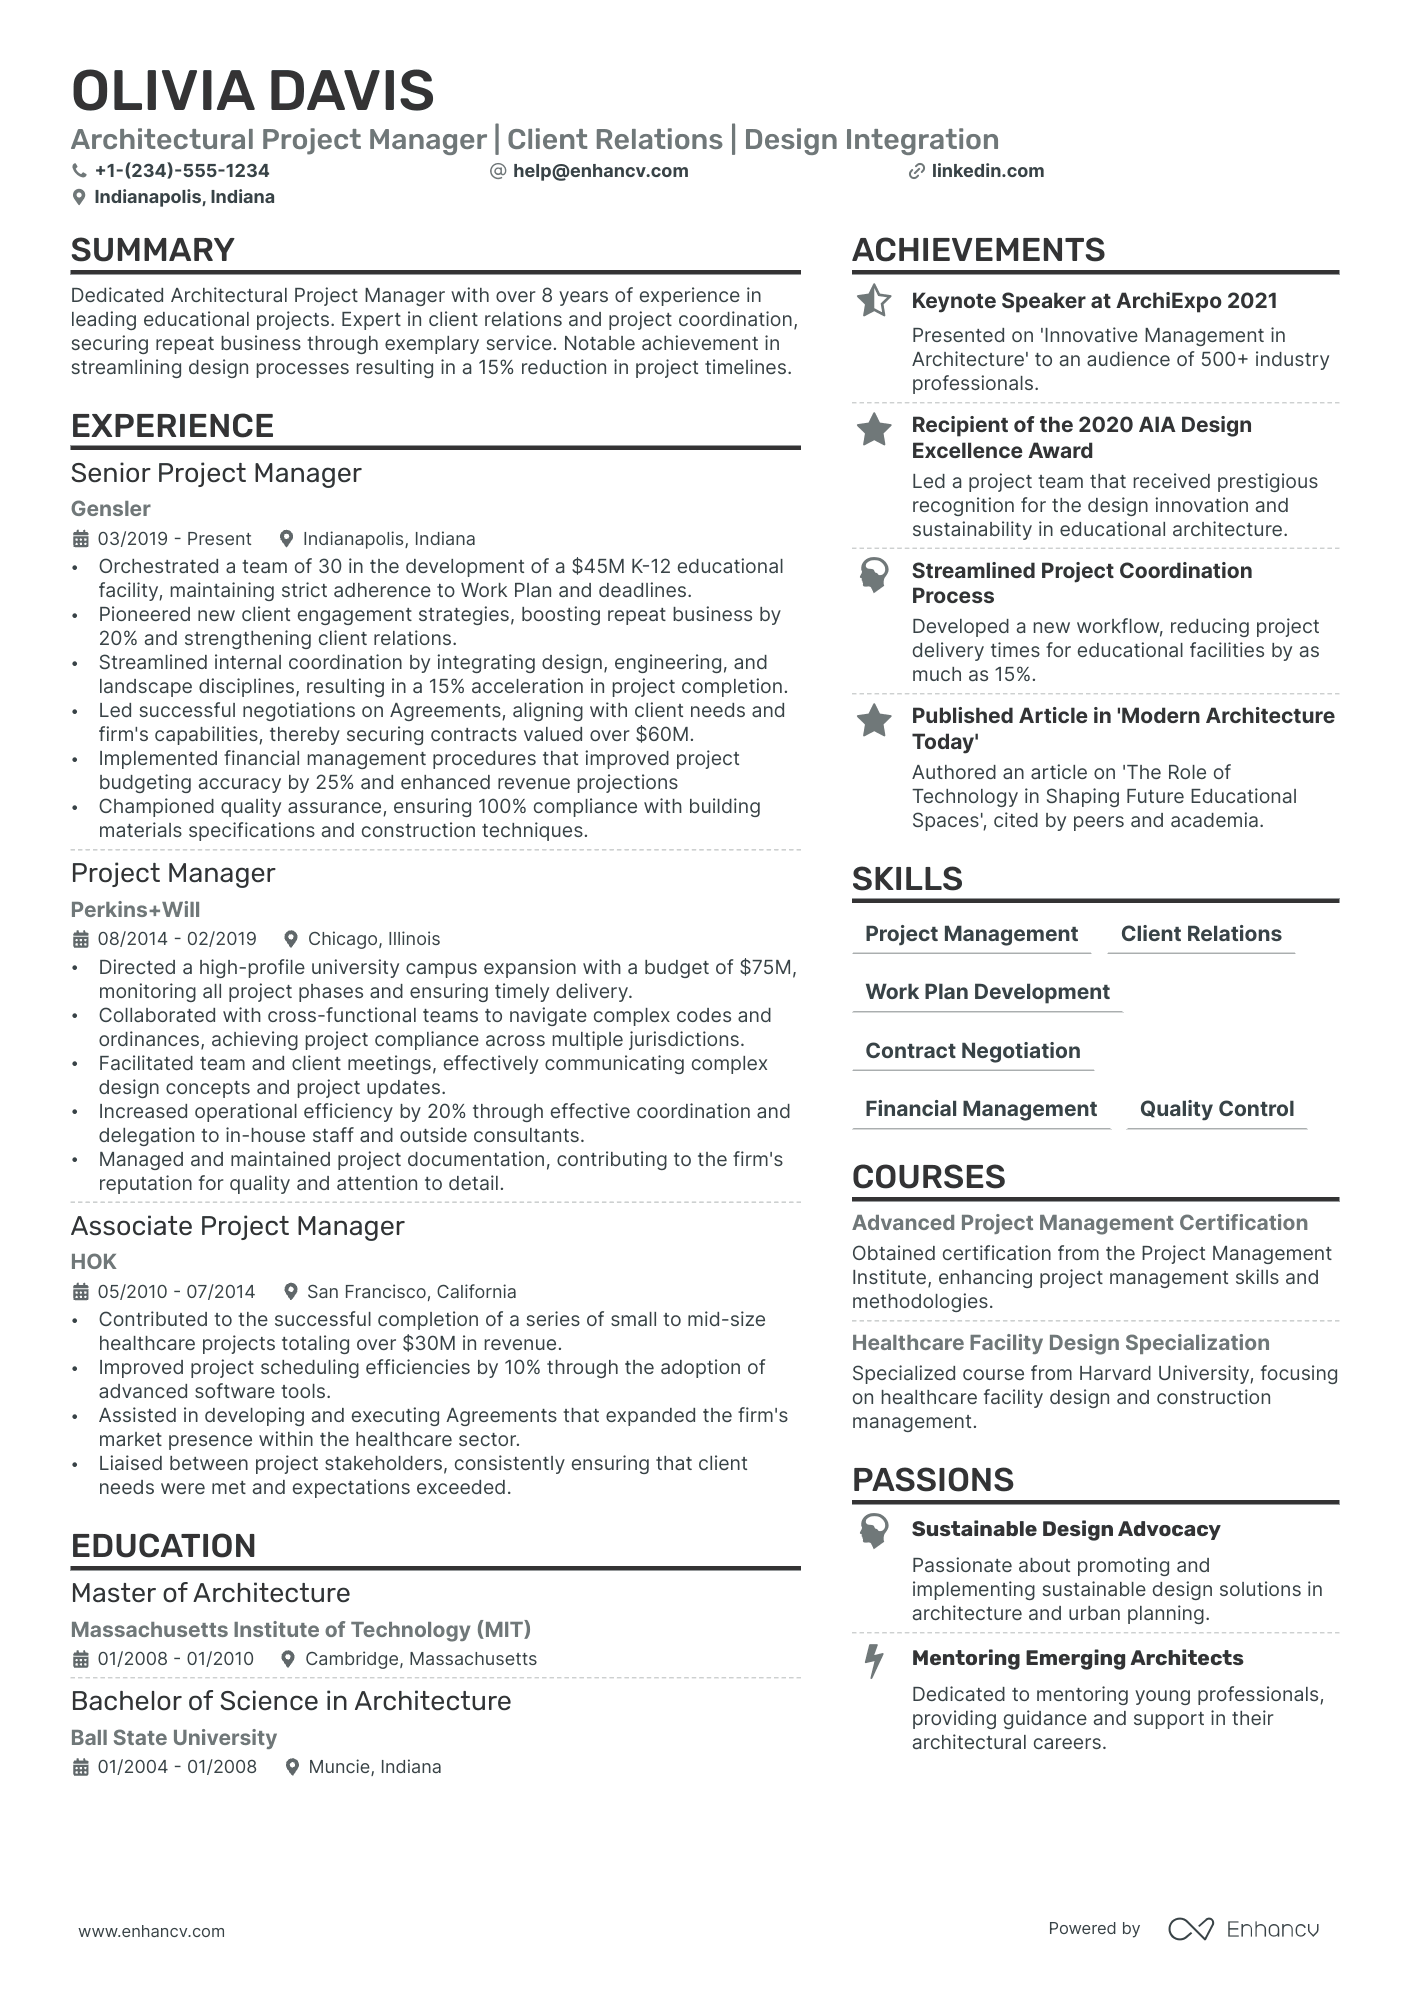 Architectural Project Manager resume example